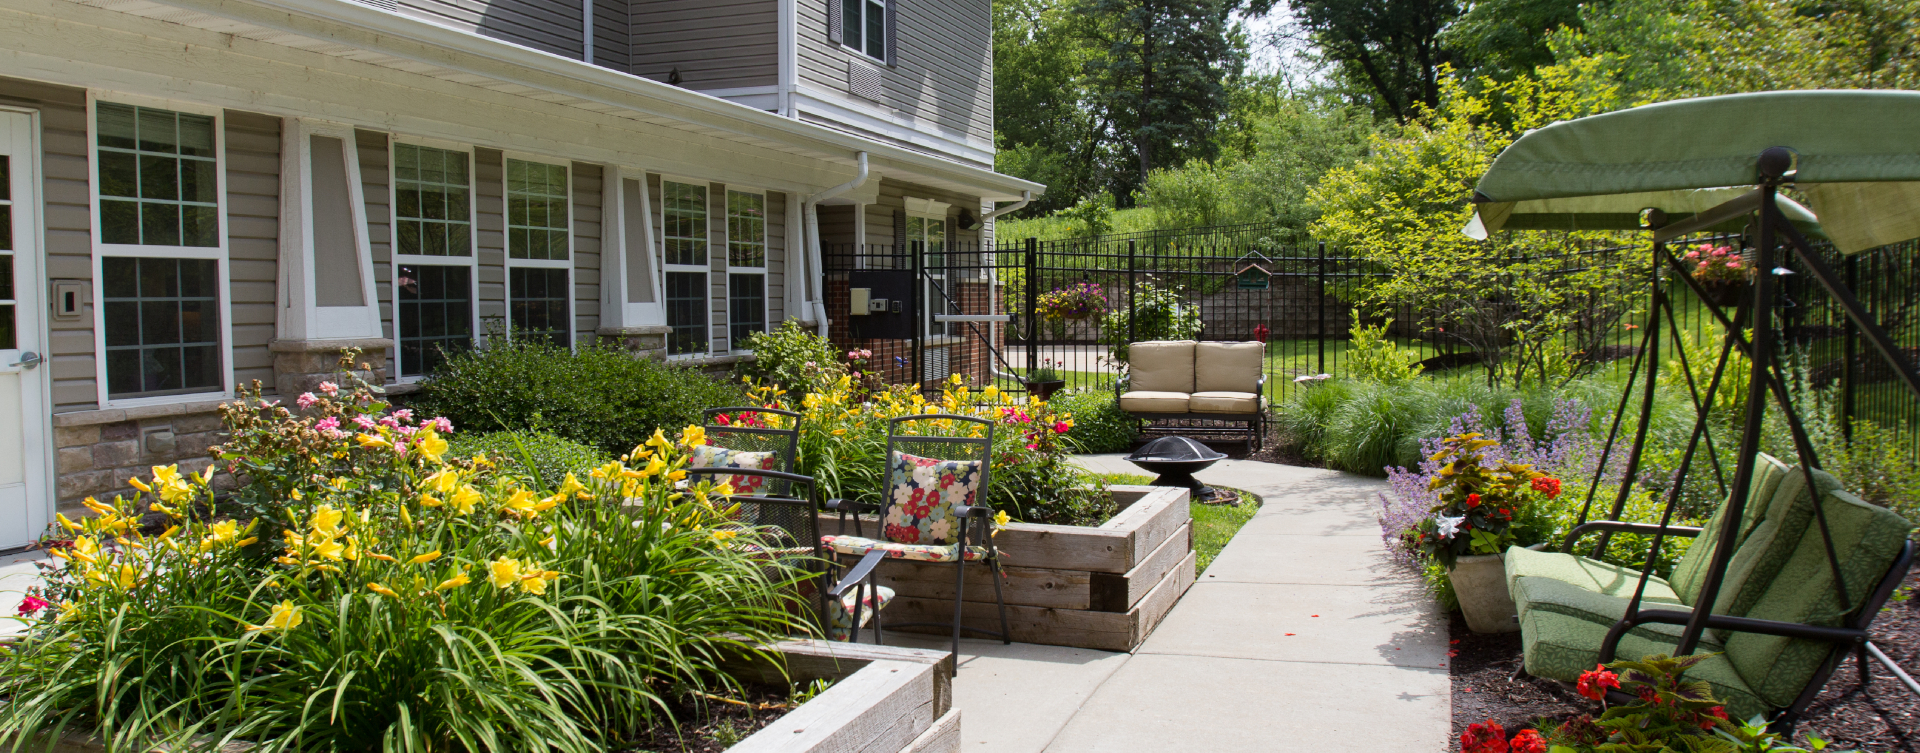 A single entrance courtyard gives residents with dementia the opportunity to be safe outside at Bickford of St. Charles